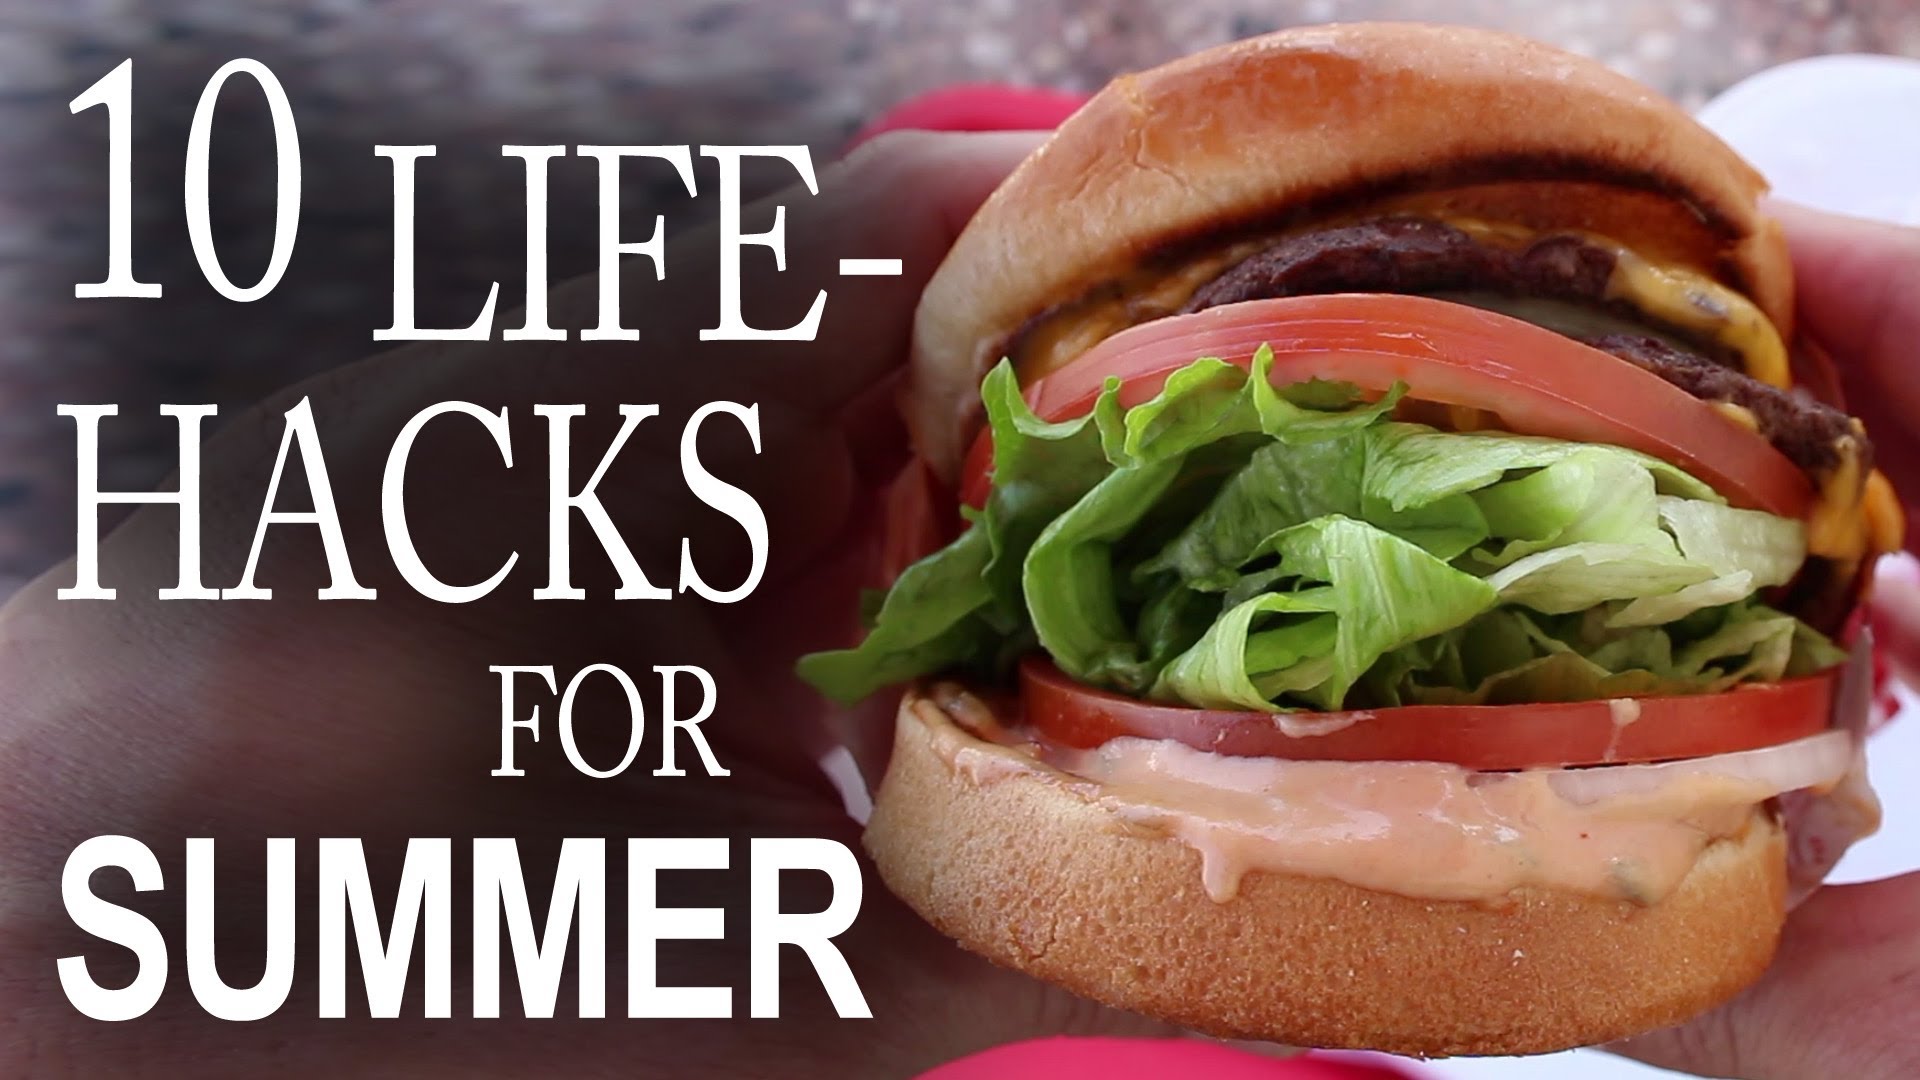 X life. “Summer Life in the countryside” offbrand. Hot Summer Hacks. Hot Summer Hacks for your yacay.